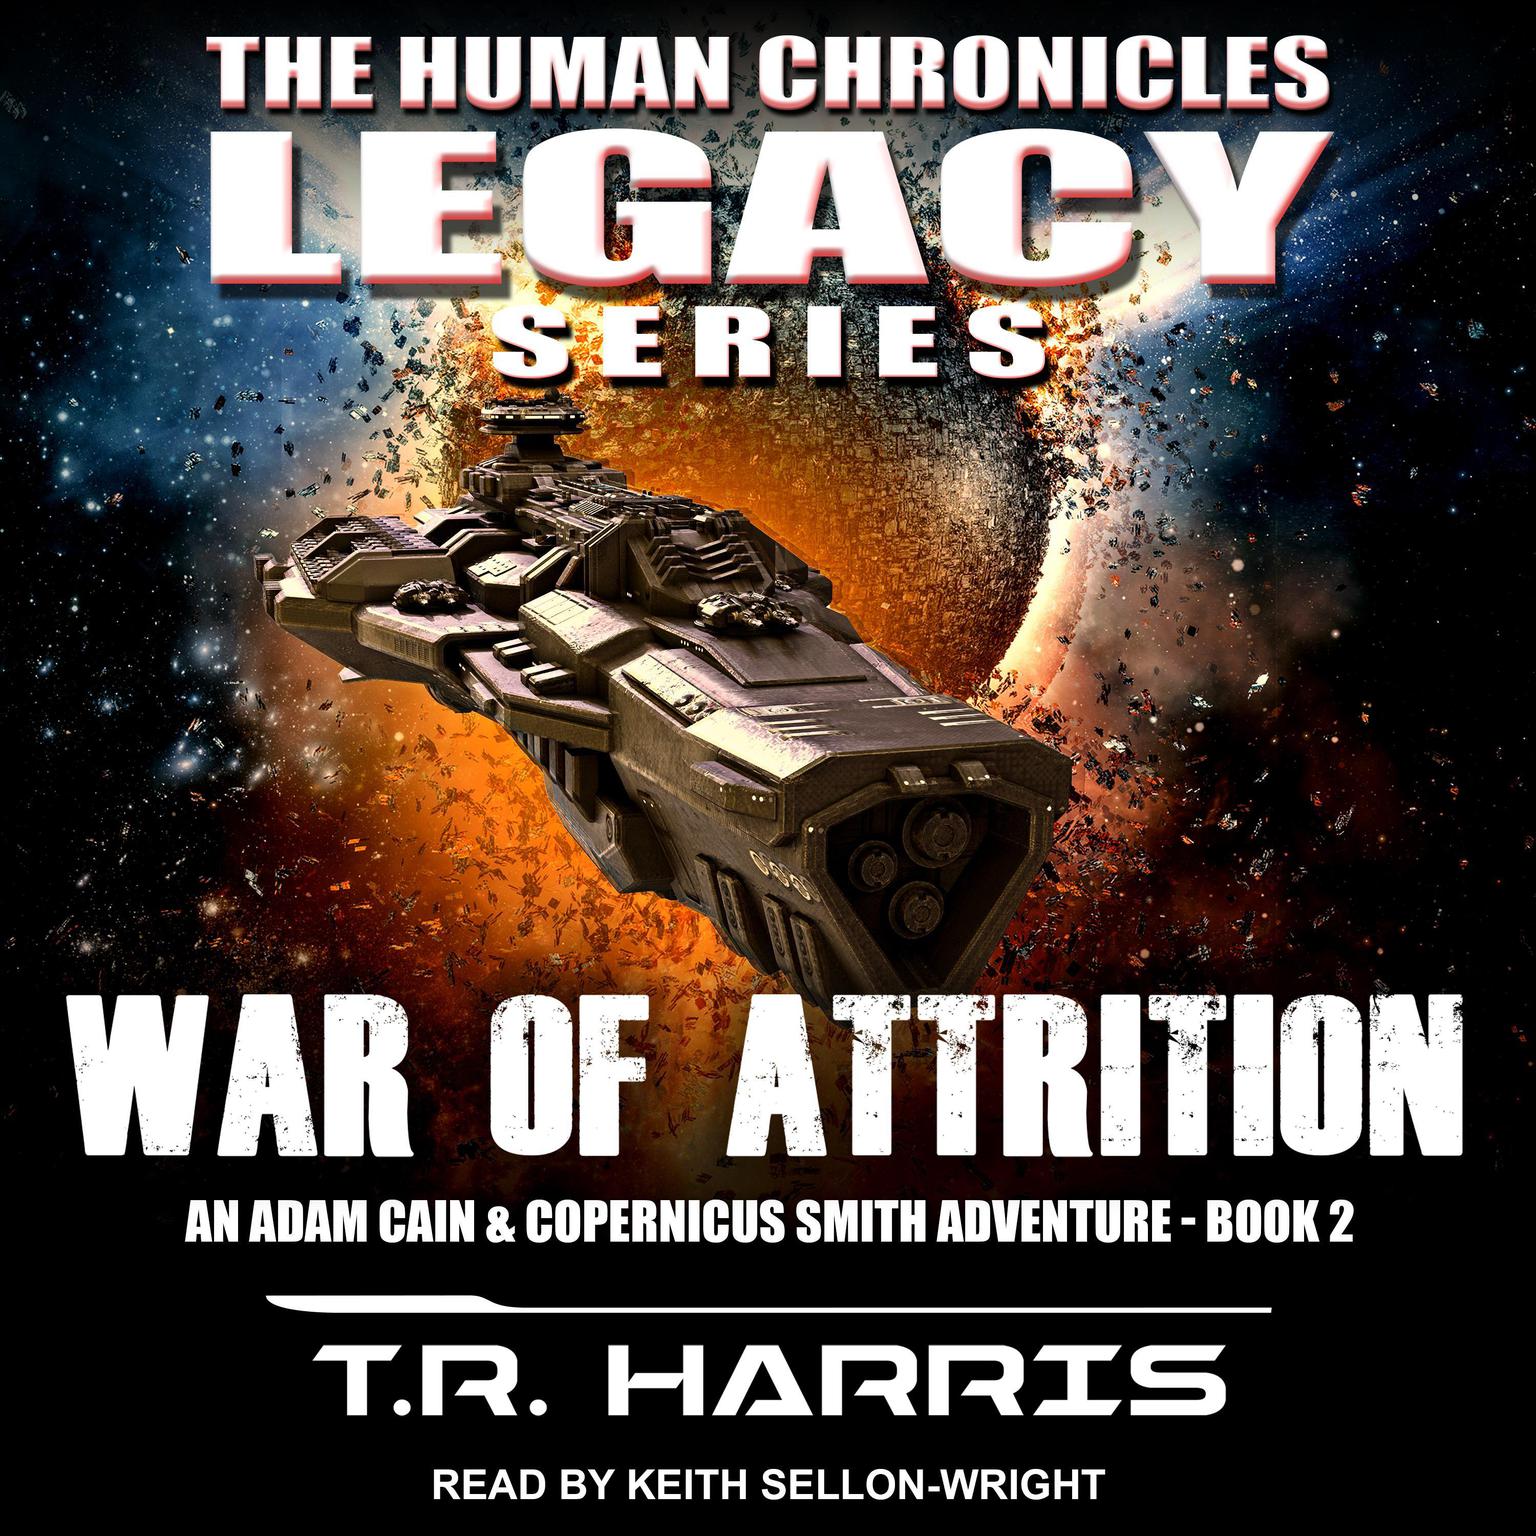 War of Attrition: An Adam Cain and Copernicus Smith Adventure: The Human Chronicles Legacy Series Book 2 Audiobook, by T. R. Harris